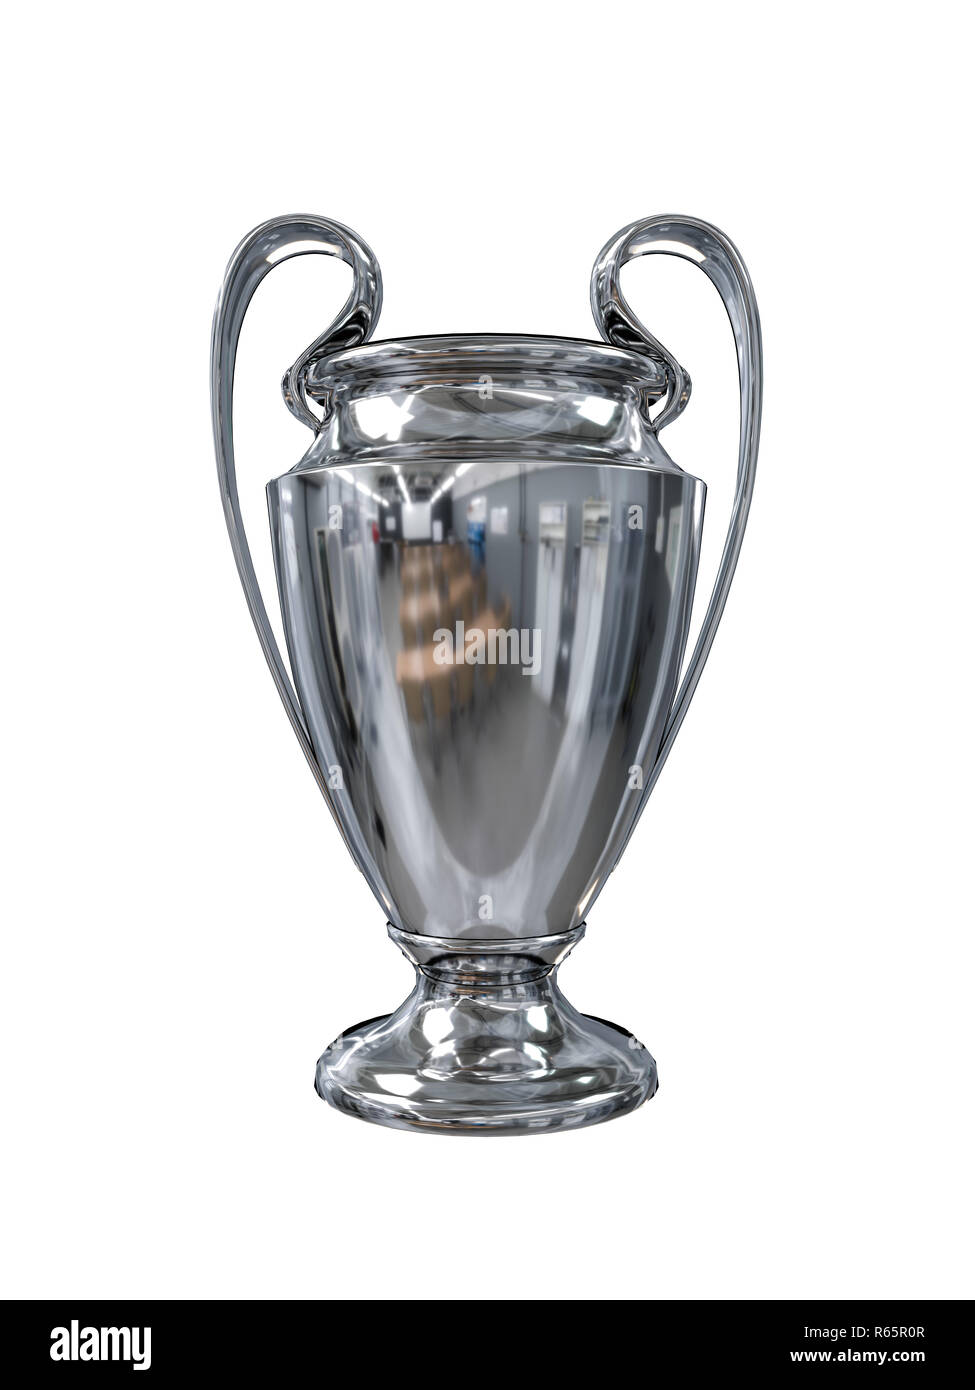 Champions league trophy Cut Out Stock Images & Pictures - Alamy